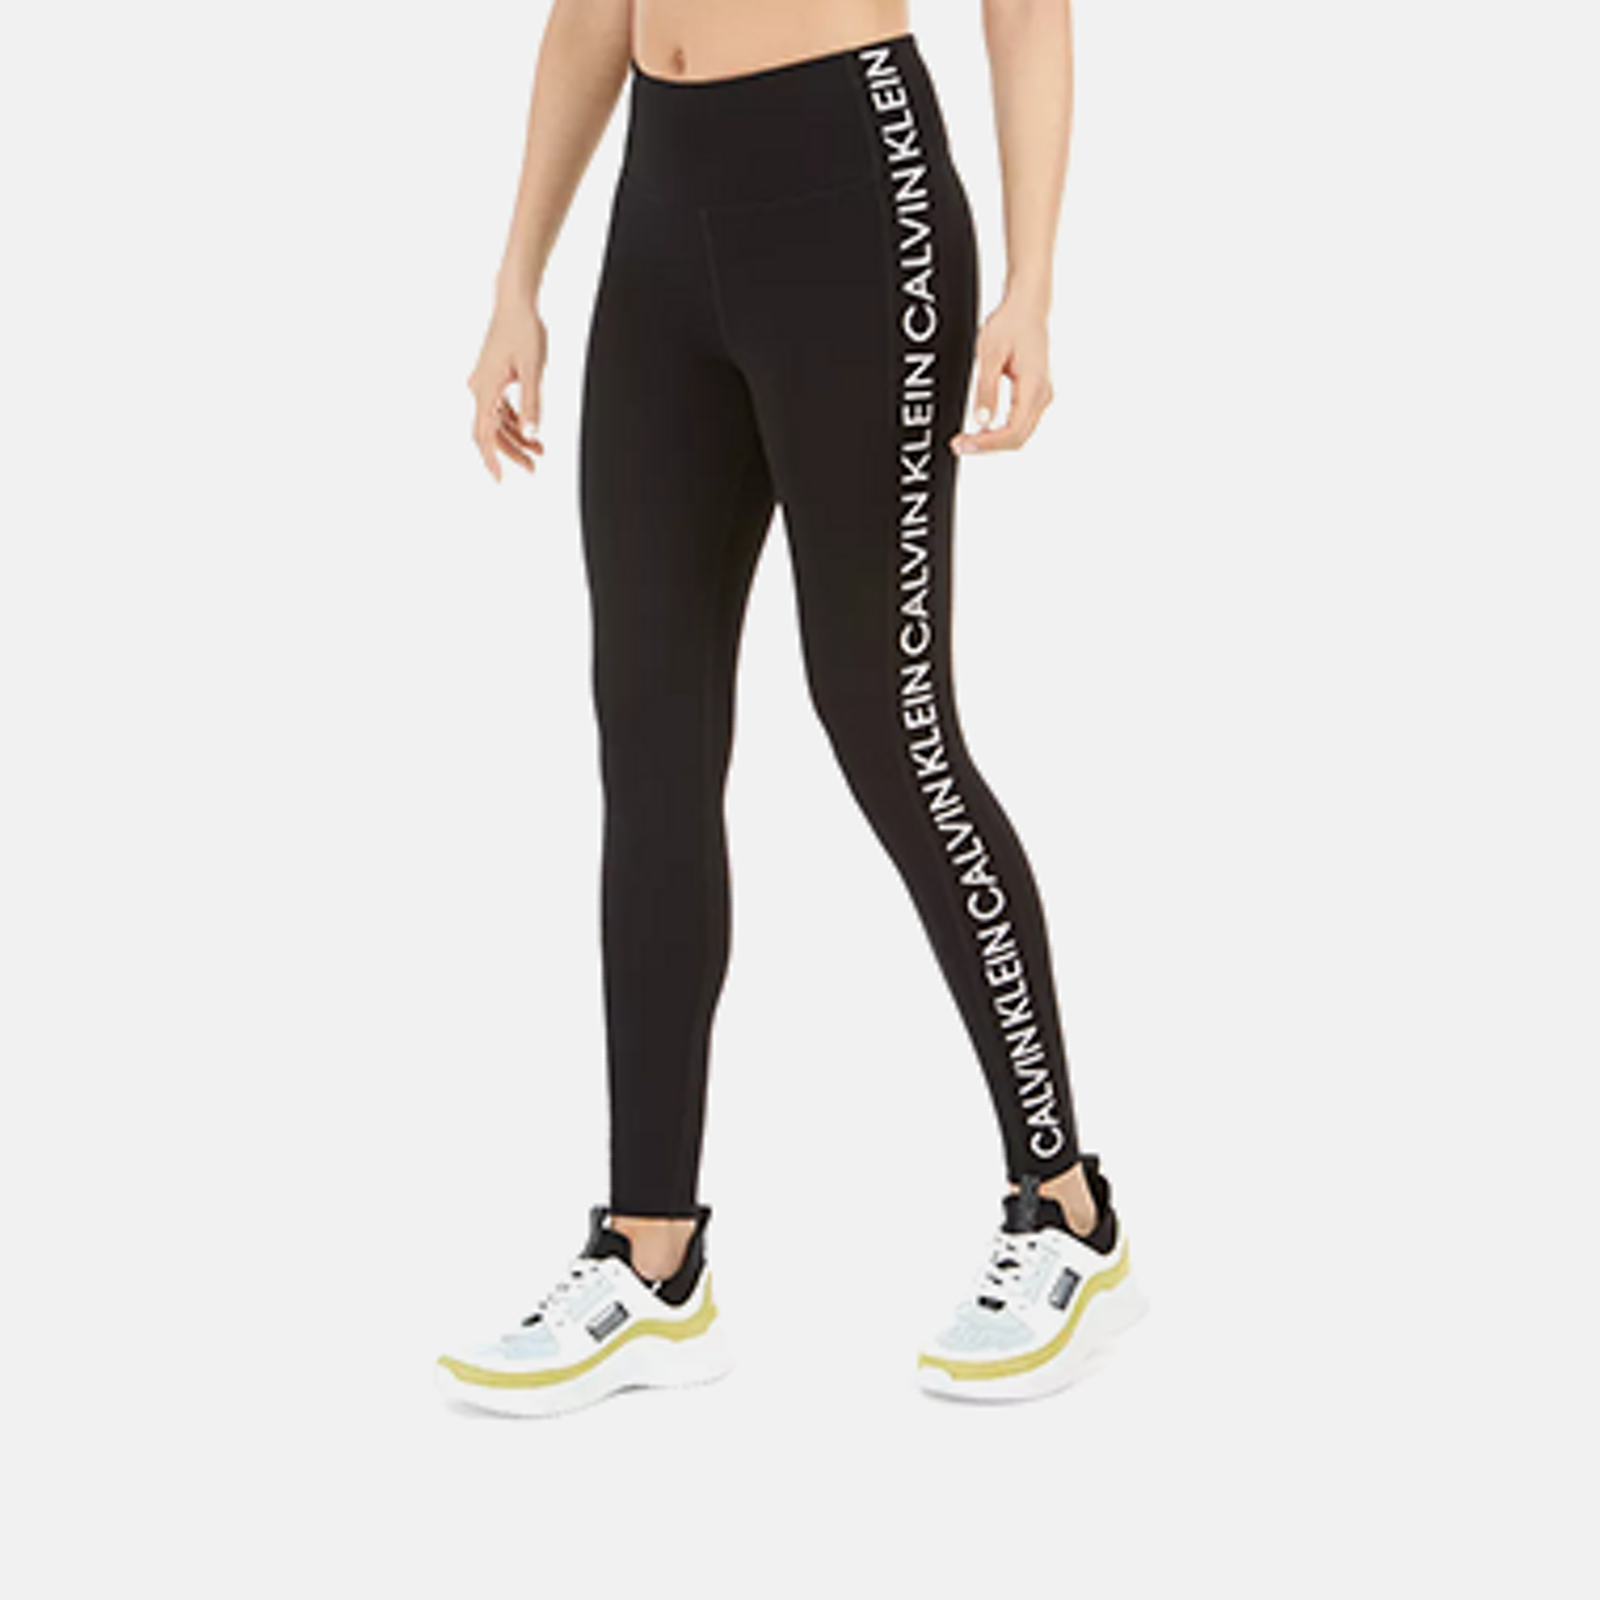 Under Armour Workout Clothing & Activewear for Women - Macy's